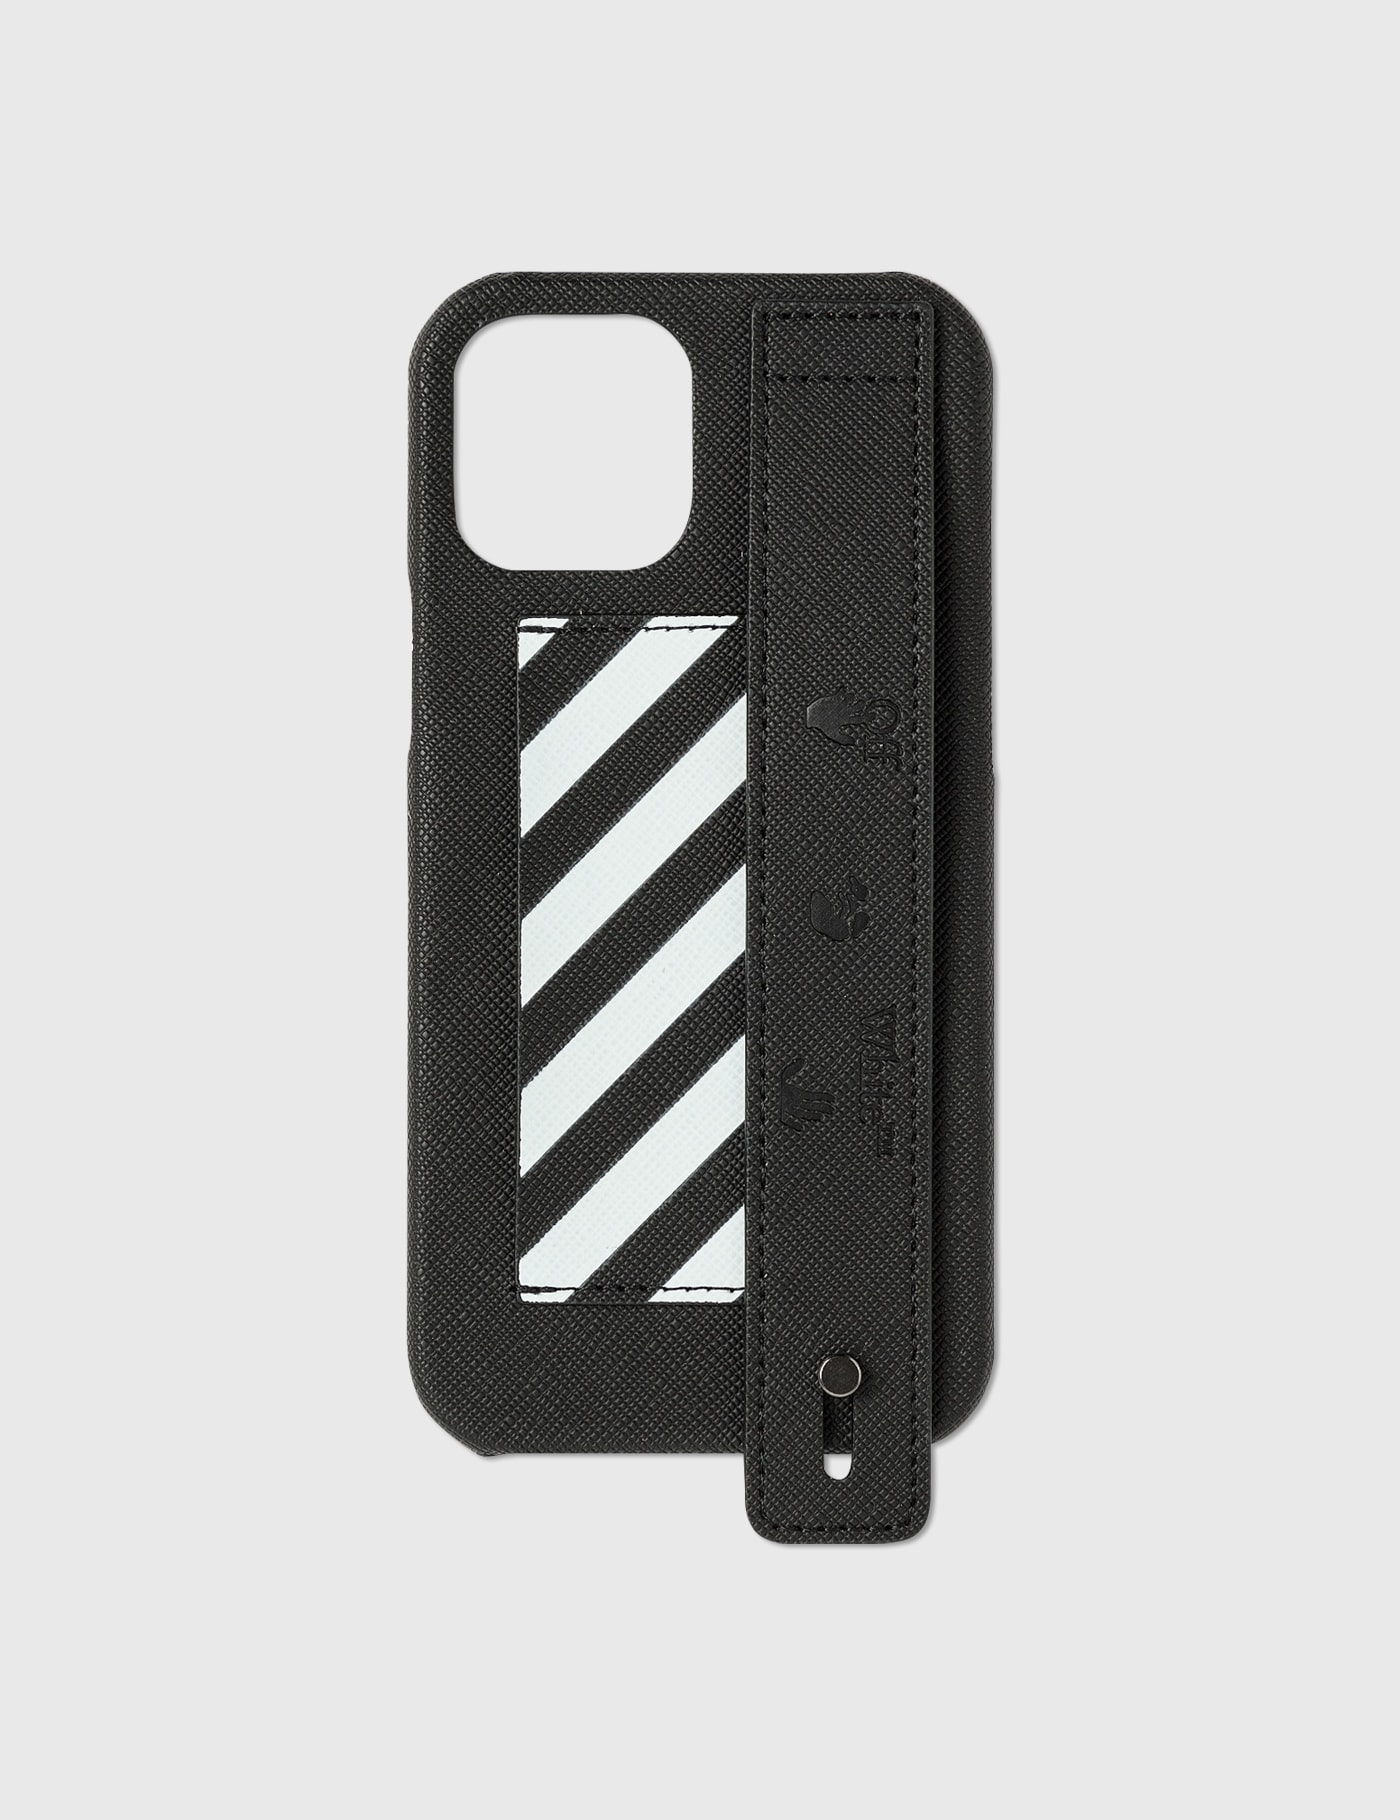 Off-white Mf Cover Iphone 12 Pro Max Case In Black